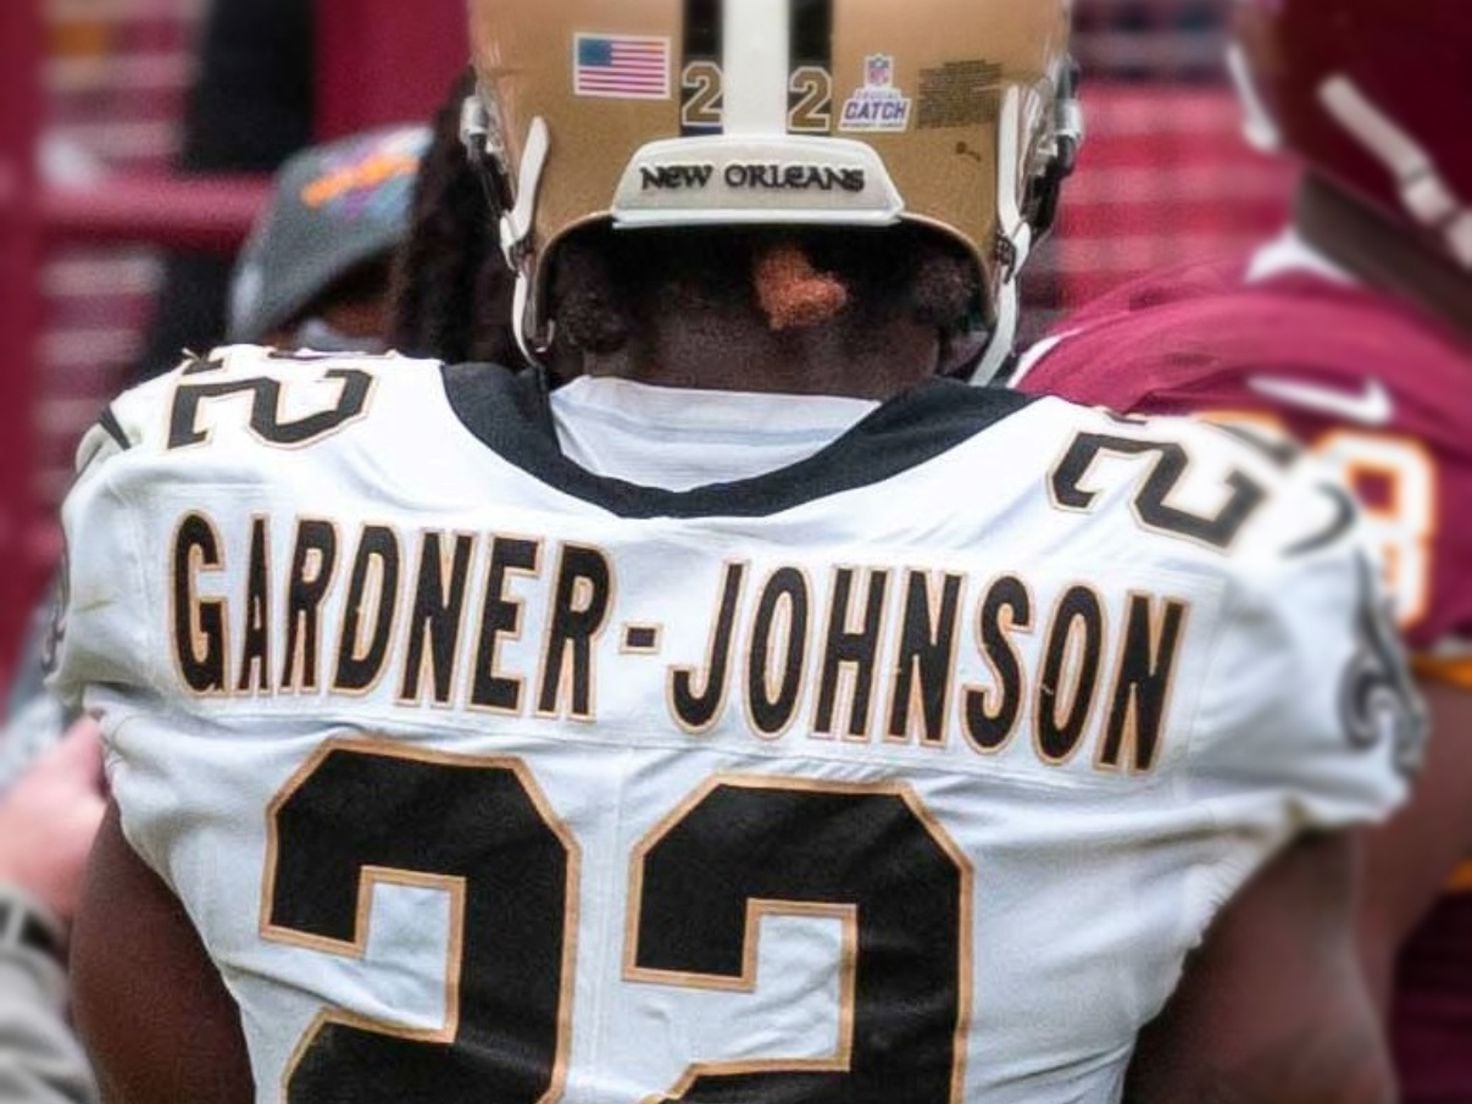 Eagles acquire Gardner-Johnson from Saints in surprising trade